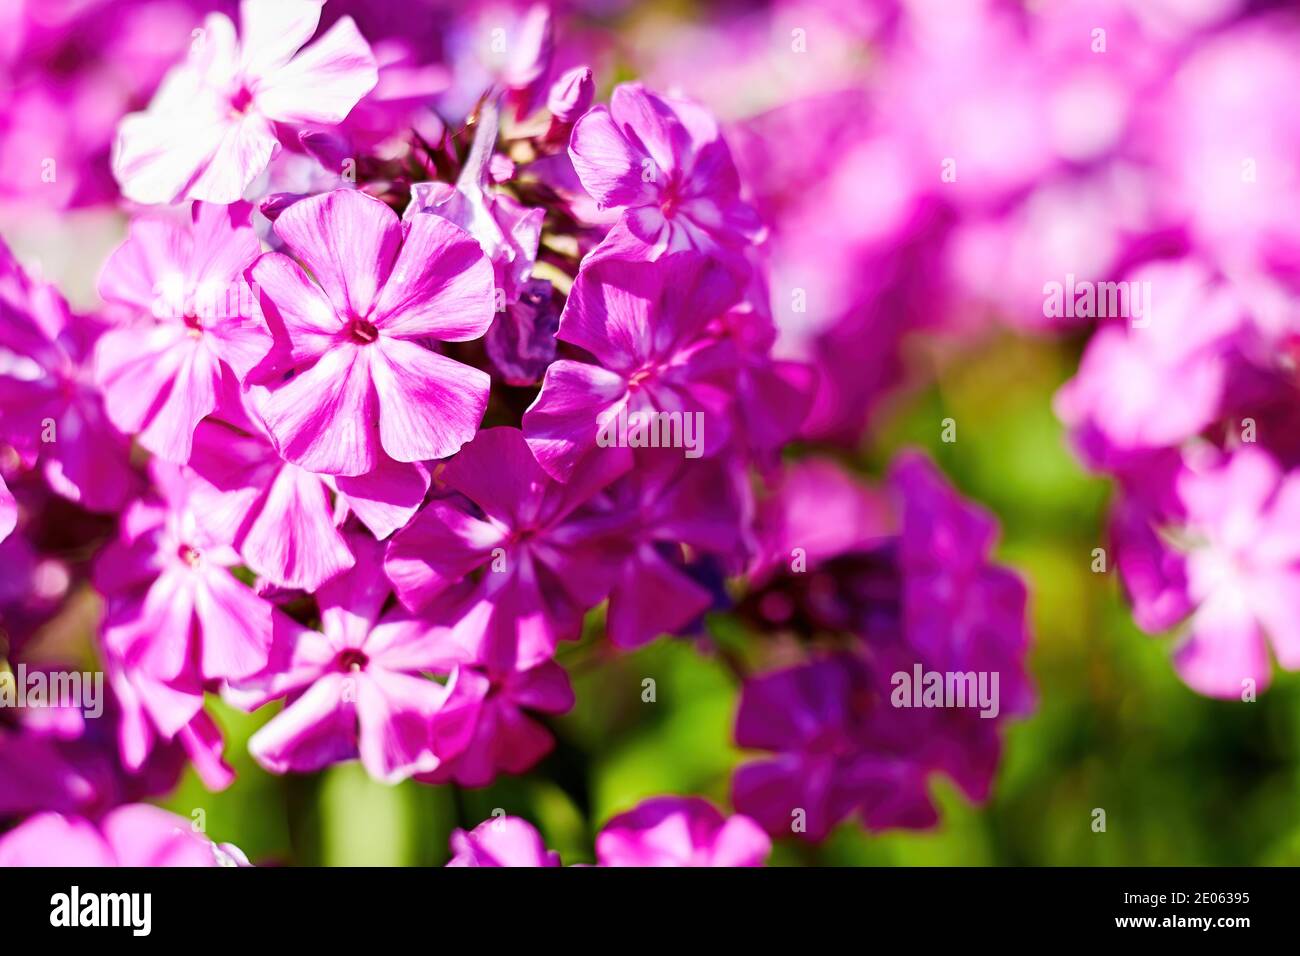 Vivid pink phlox flower bush with blurred background. Floral backdrops and textures Stock Photo